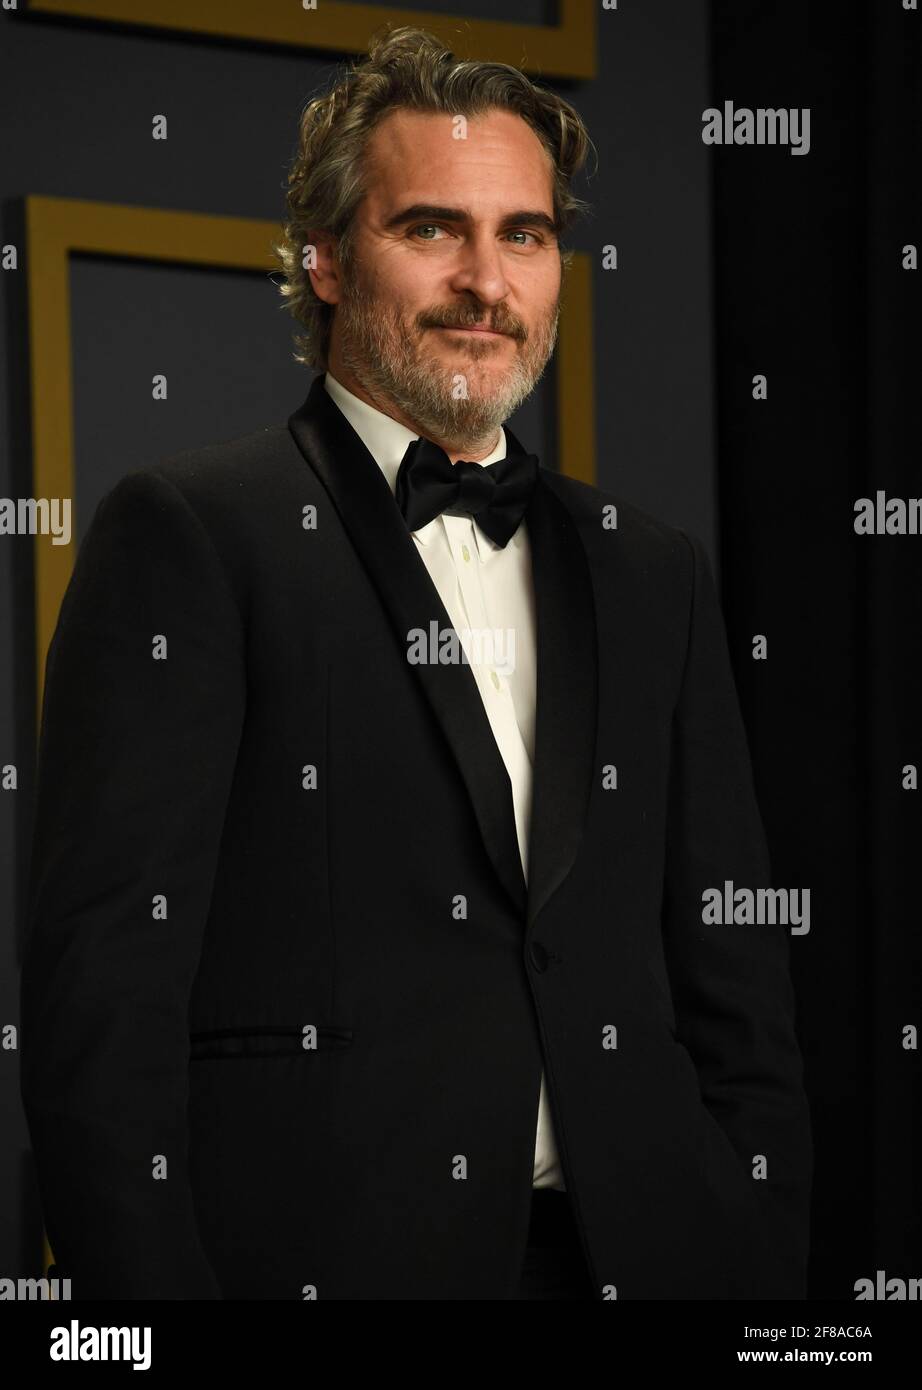 Jacquin Phoenix, Joker in the Press Room during the 92nd Annual Academy Awards, Oscars, held in the Dolby Theater at Hollywood and Highland in Hollywood, California, Sunday, February 9, 2020. Photo by Jennifer Graylock-Graylock.com 917-519-7666 Stock Photo